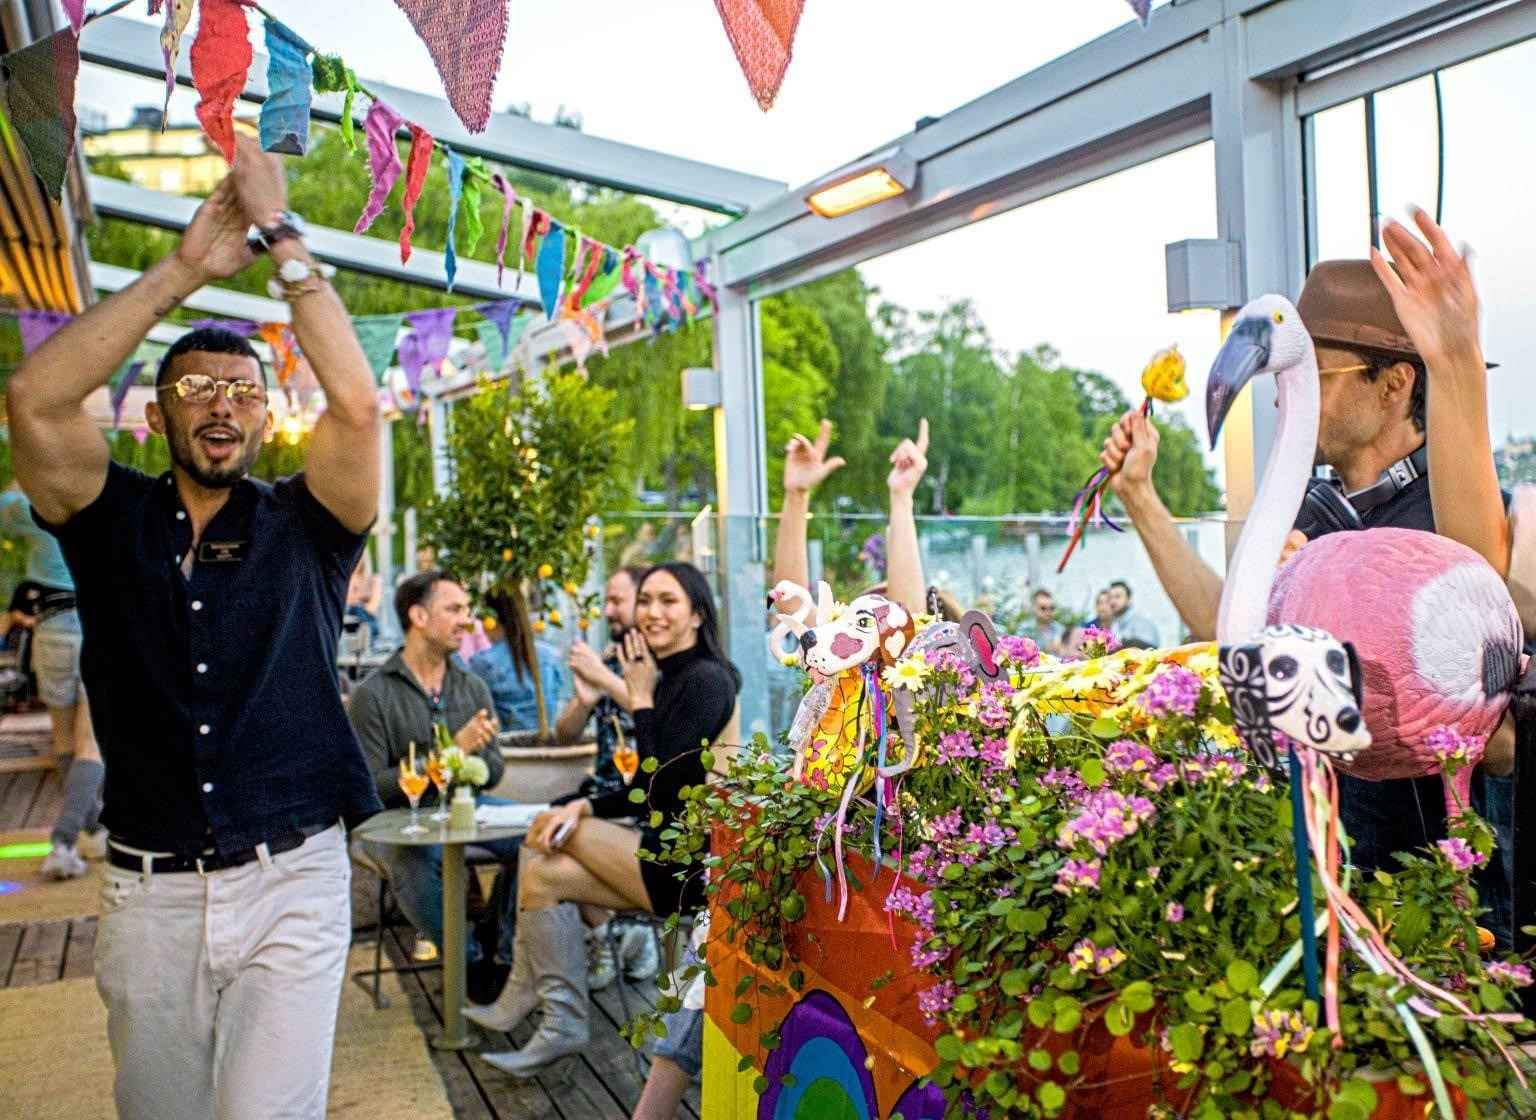 People enjoying a festive moment at Mälarpaviljongen, with a colorful setting and a pink flamingo in the foreground